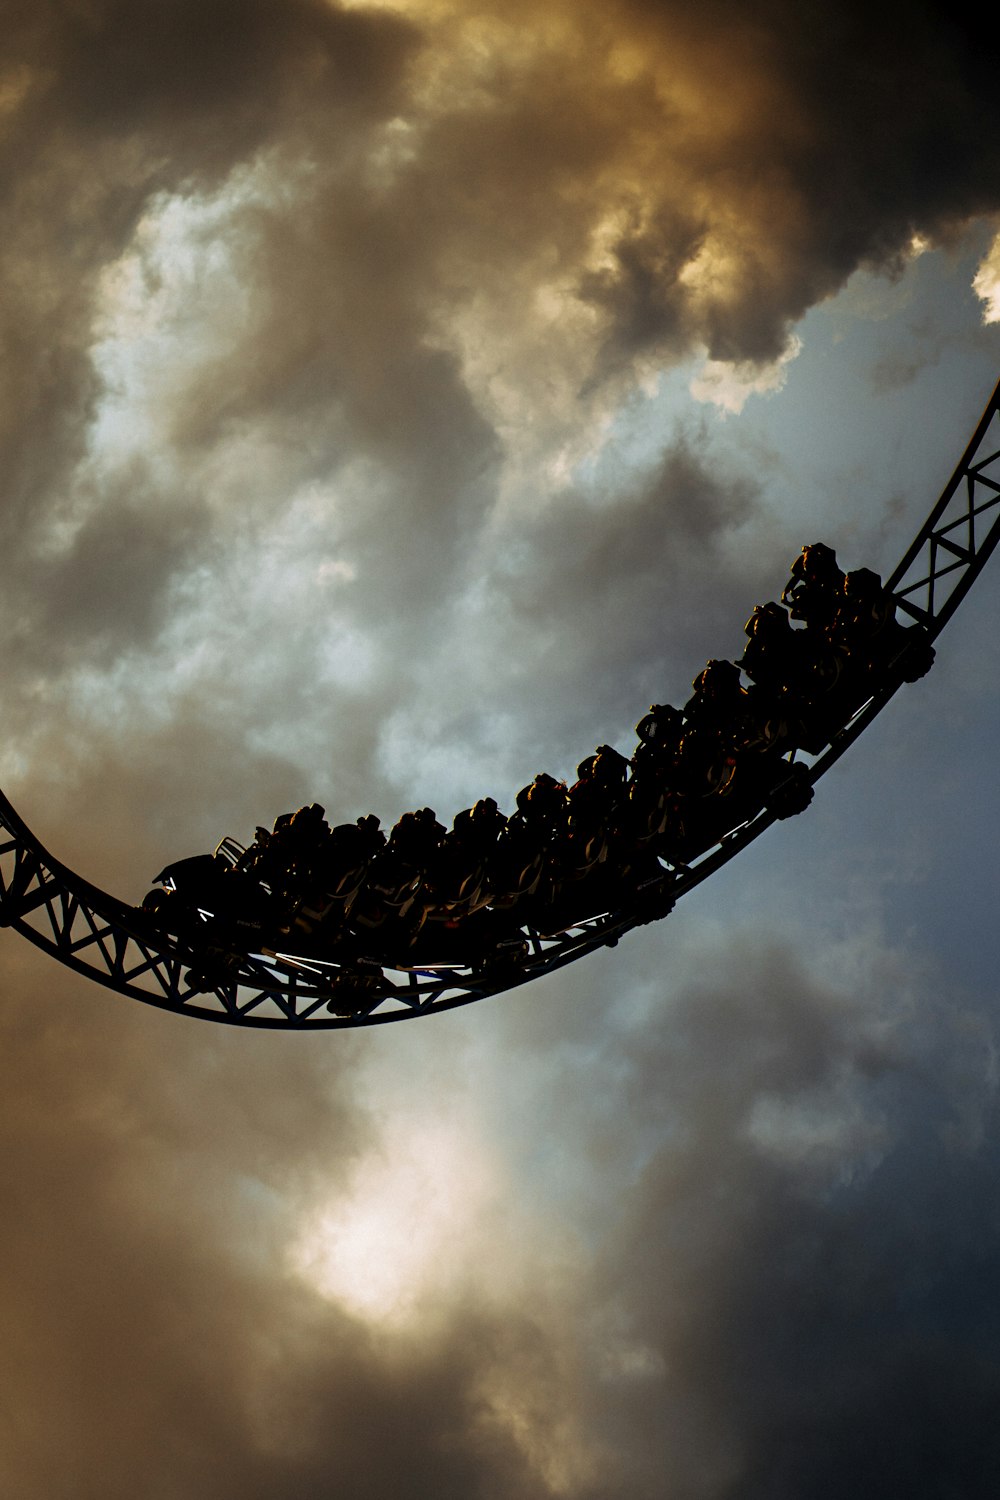 a roller coaster in the middle of a cloudy sky